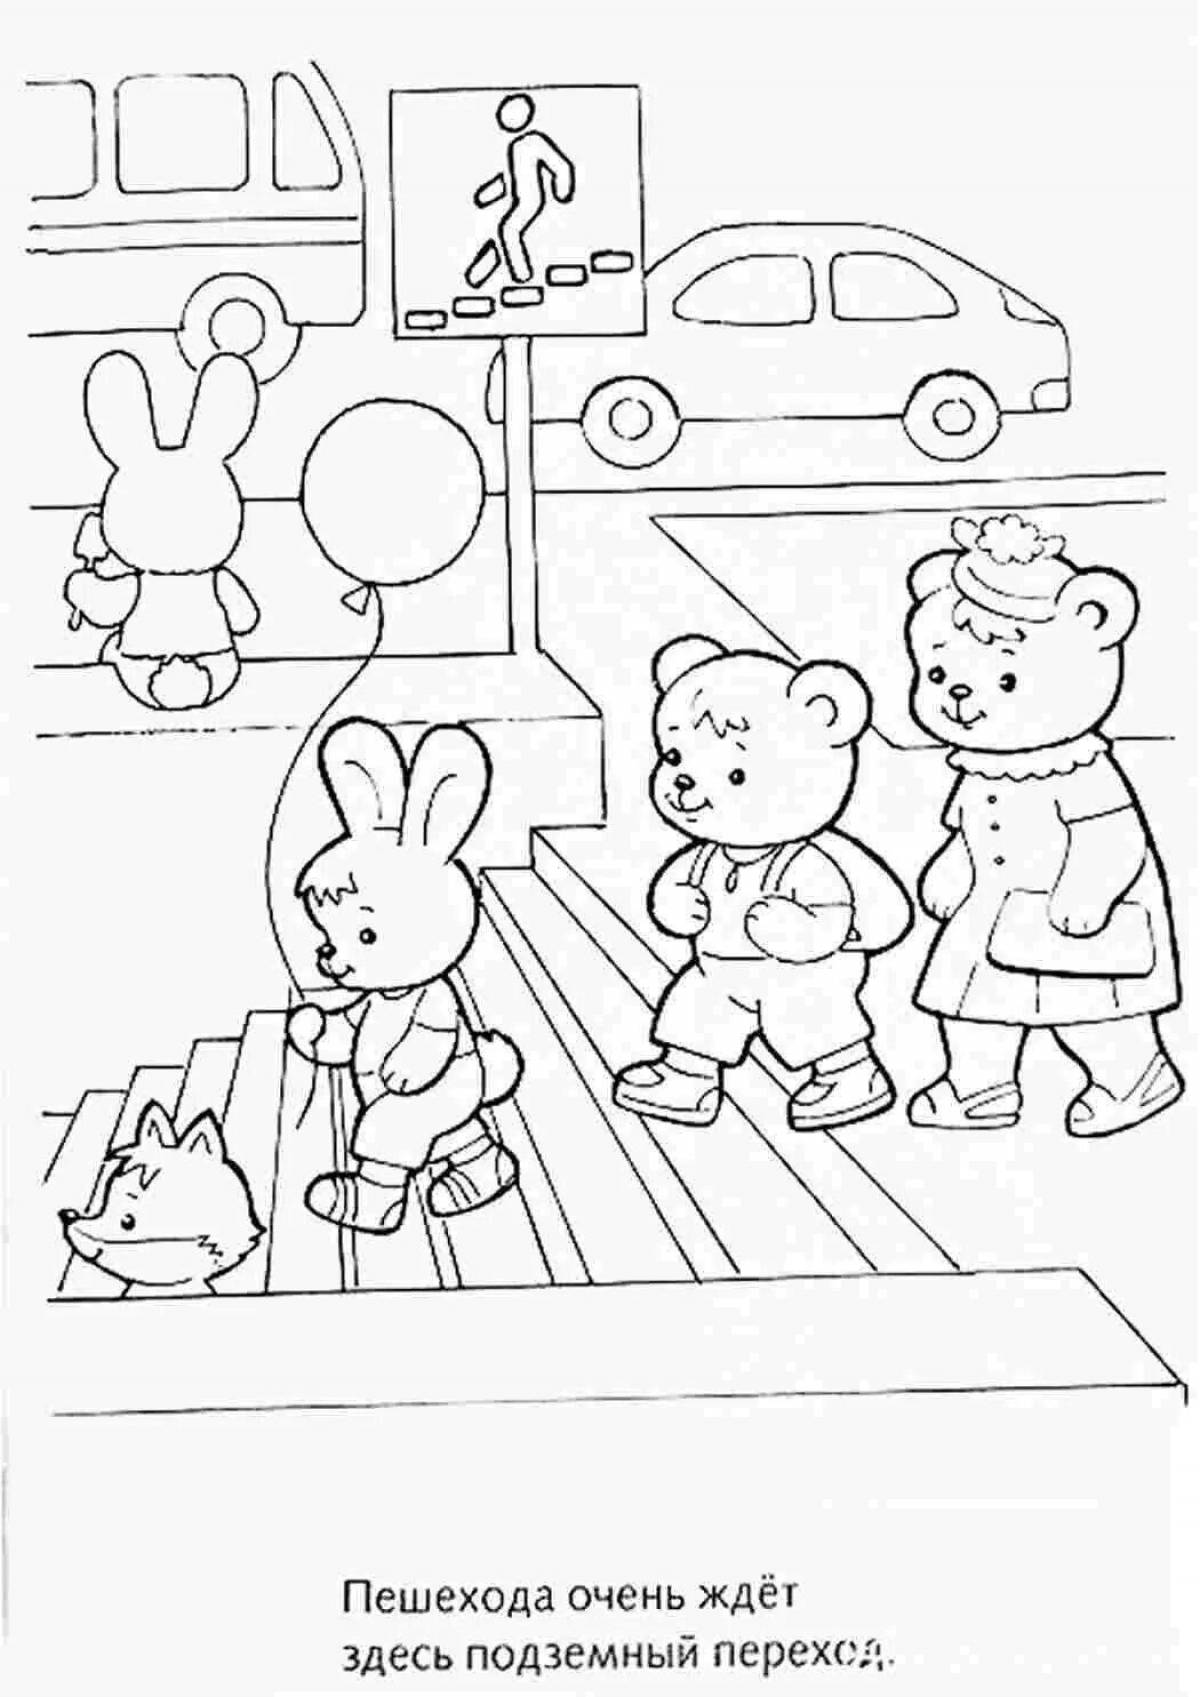 Playful underpass sign coloring page